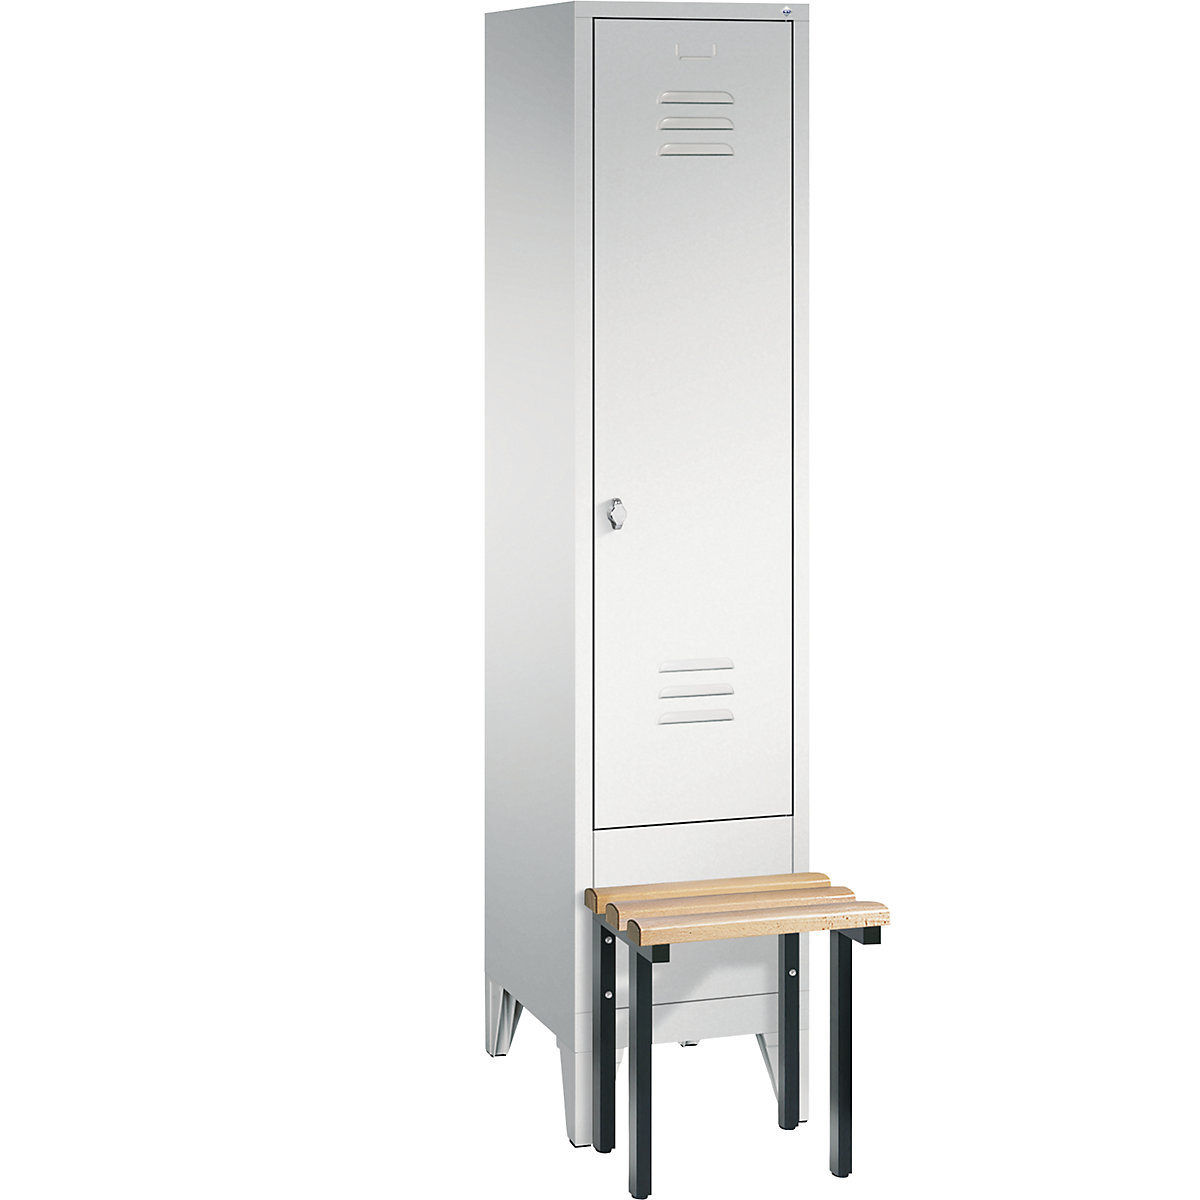 CLASSIC cloakroom locker with bench mounted in front – C+P, 1 compartment, compartment width 400 mm, light grey-6